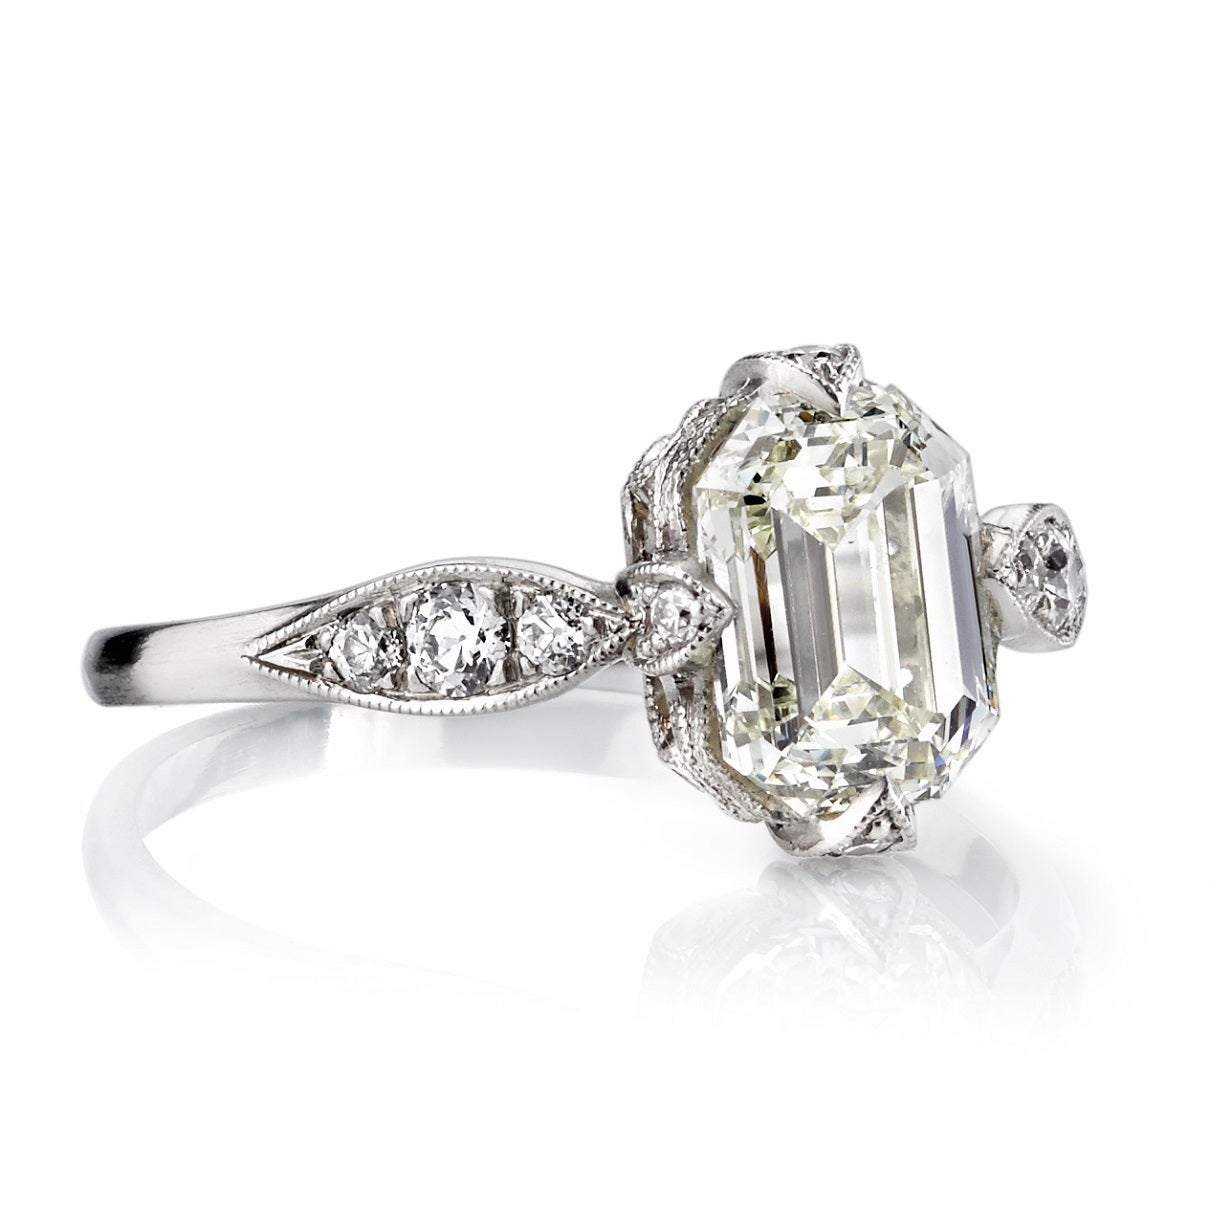 1.52ct K/VS1 Emerald cut diamond that is EGL certified and set in a platinum handcrafted 